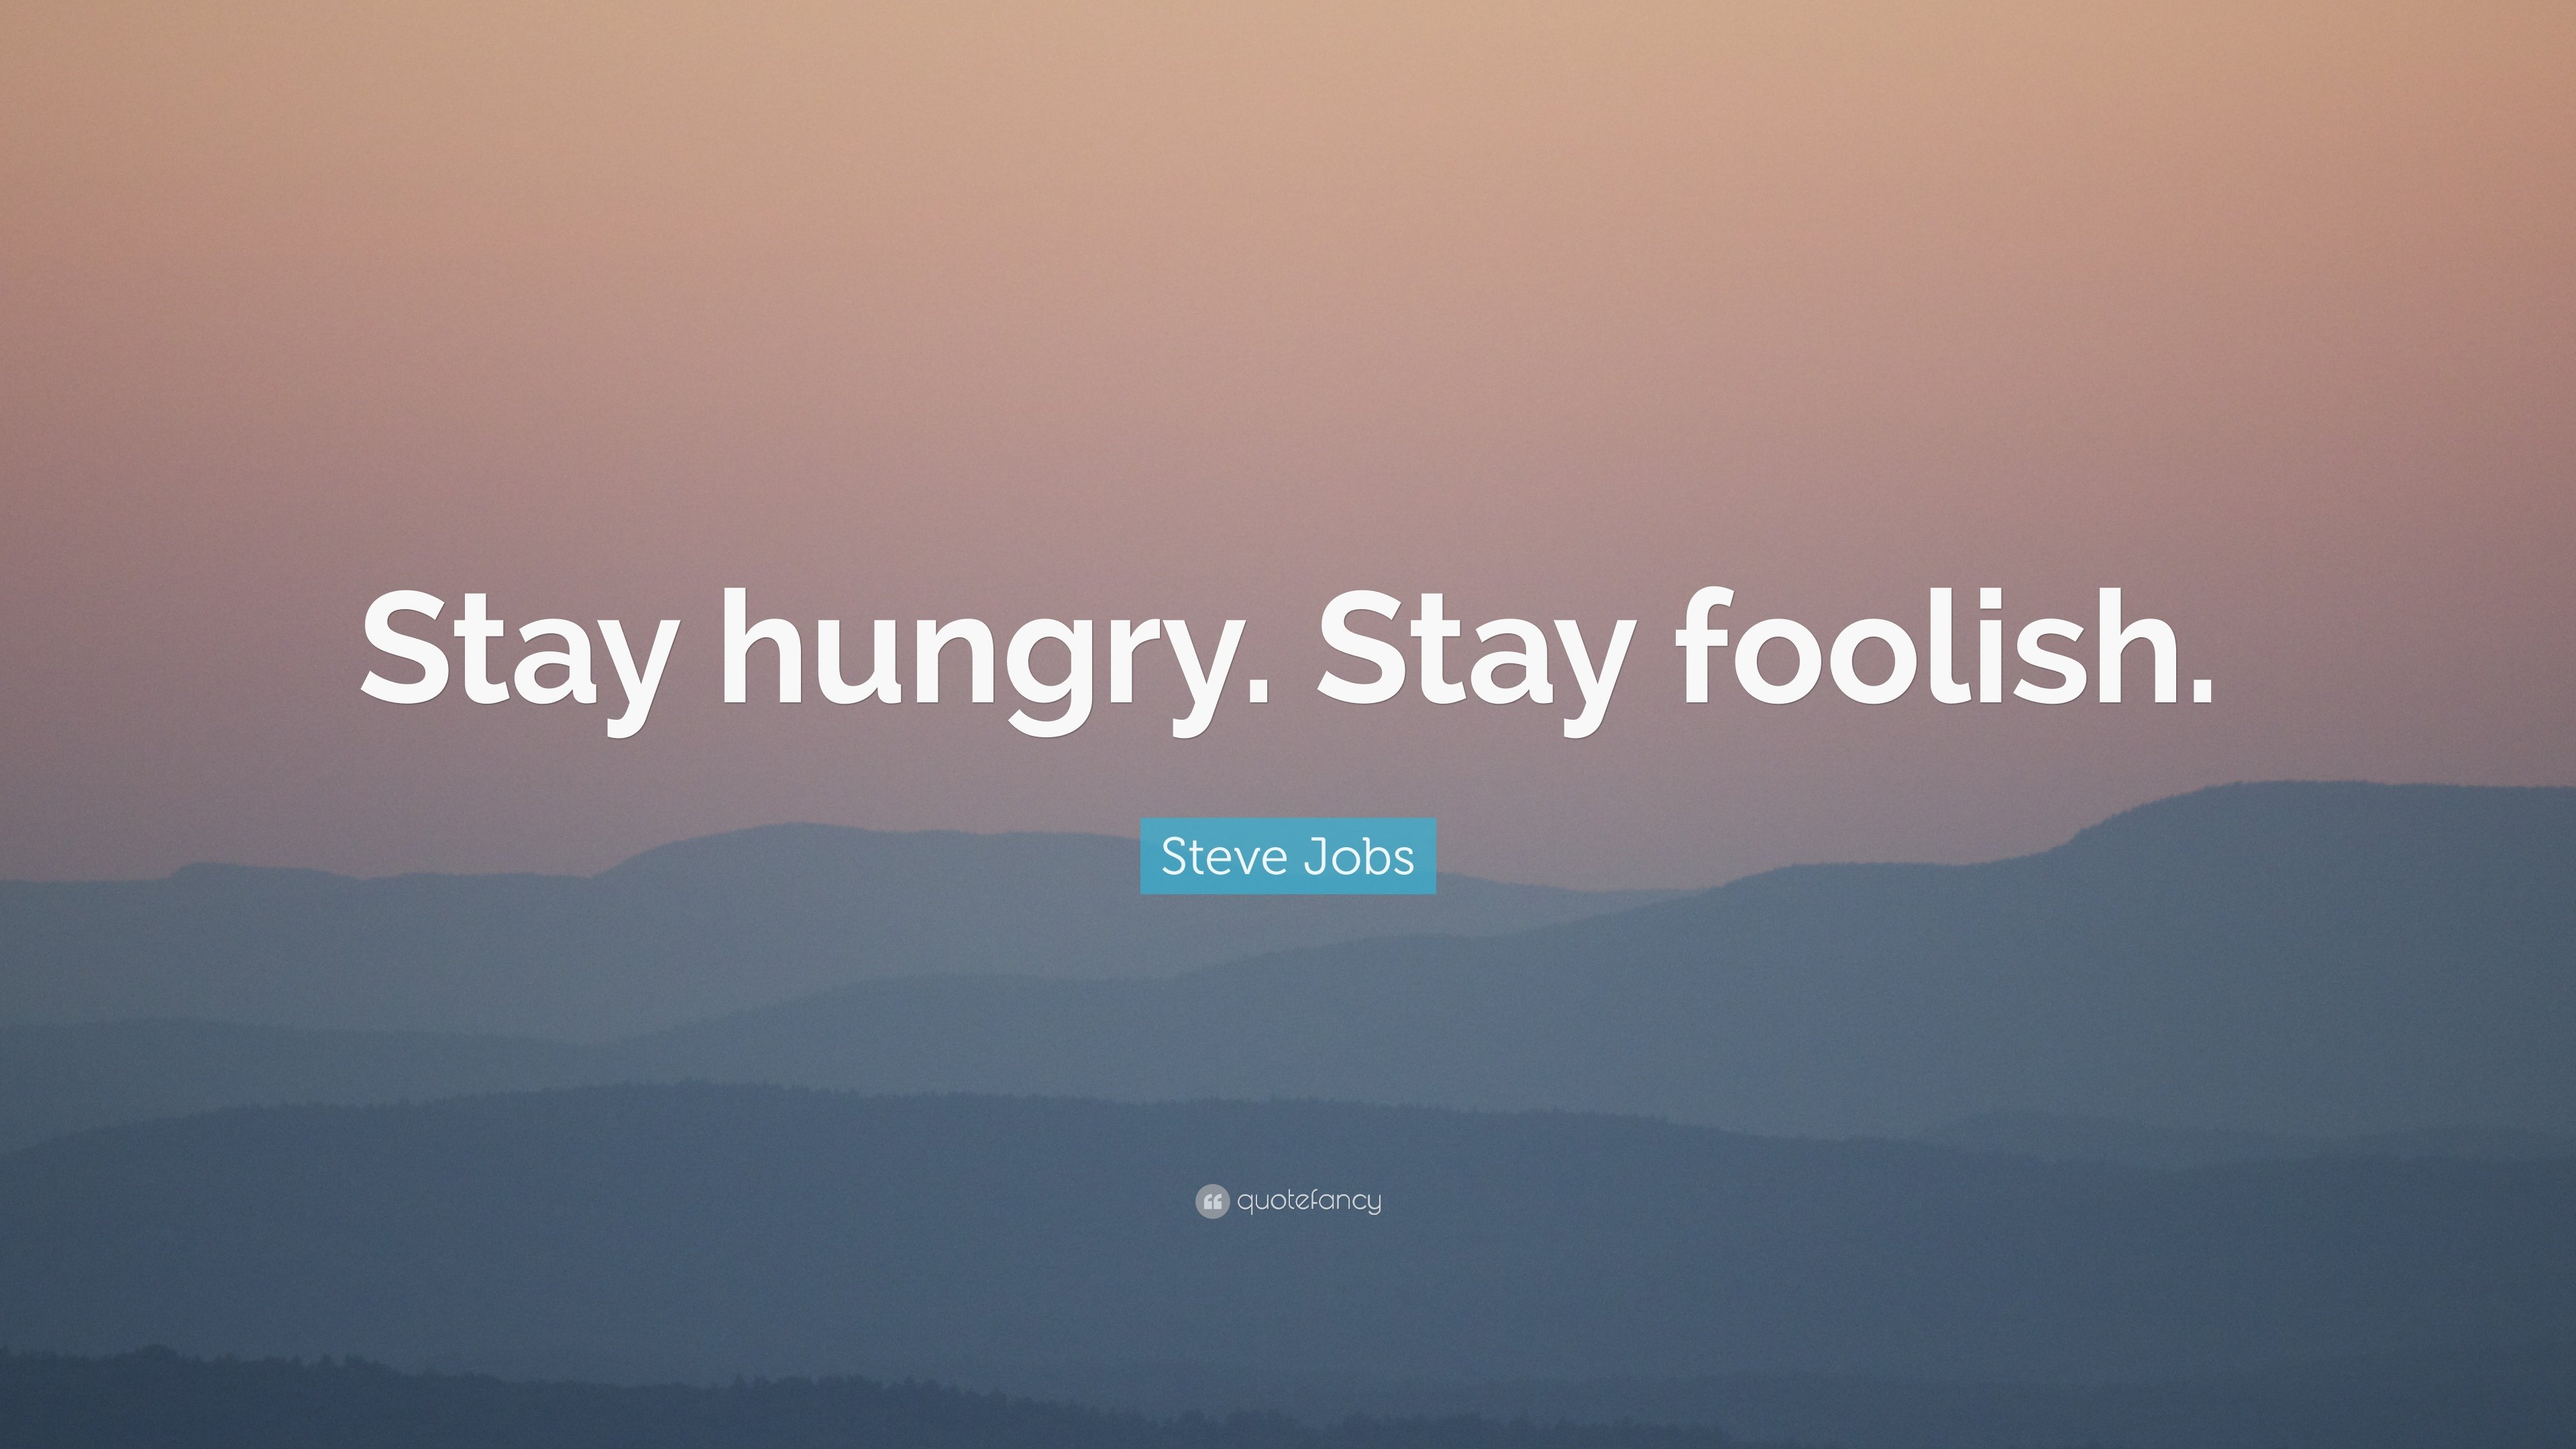 Steve Jobs Quote: “Stay hungry. Stay foolish.” 41